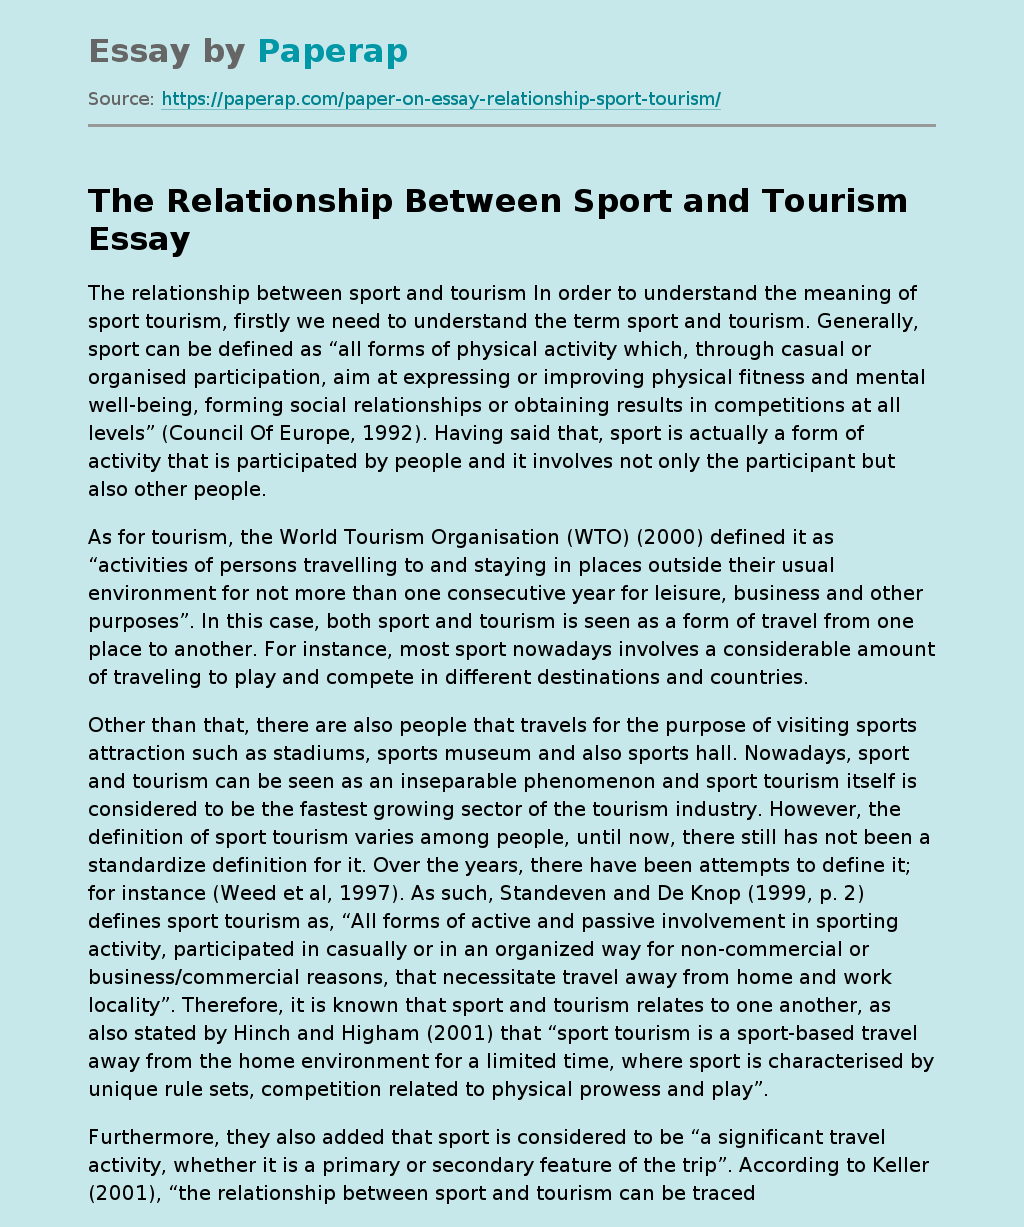 The Relationship Between Sport and Tourism